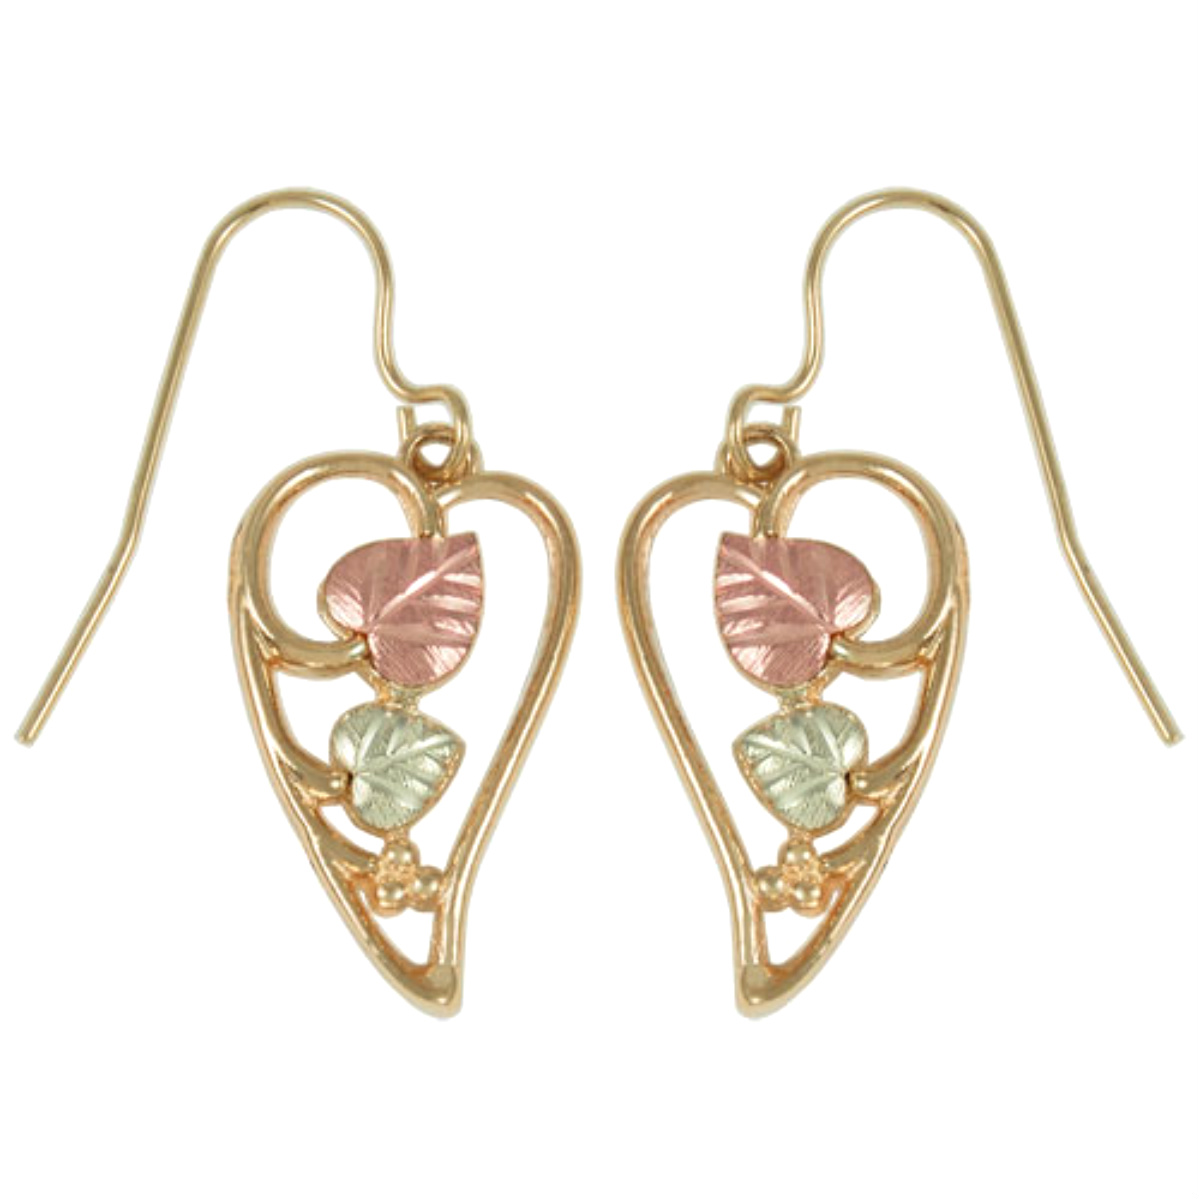 Leaf Silhouette Earrings, 10k Yellow Gold, 12k Rose and Green Gold Black Hills Gold Motif